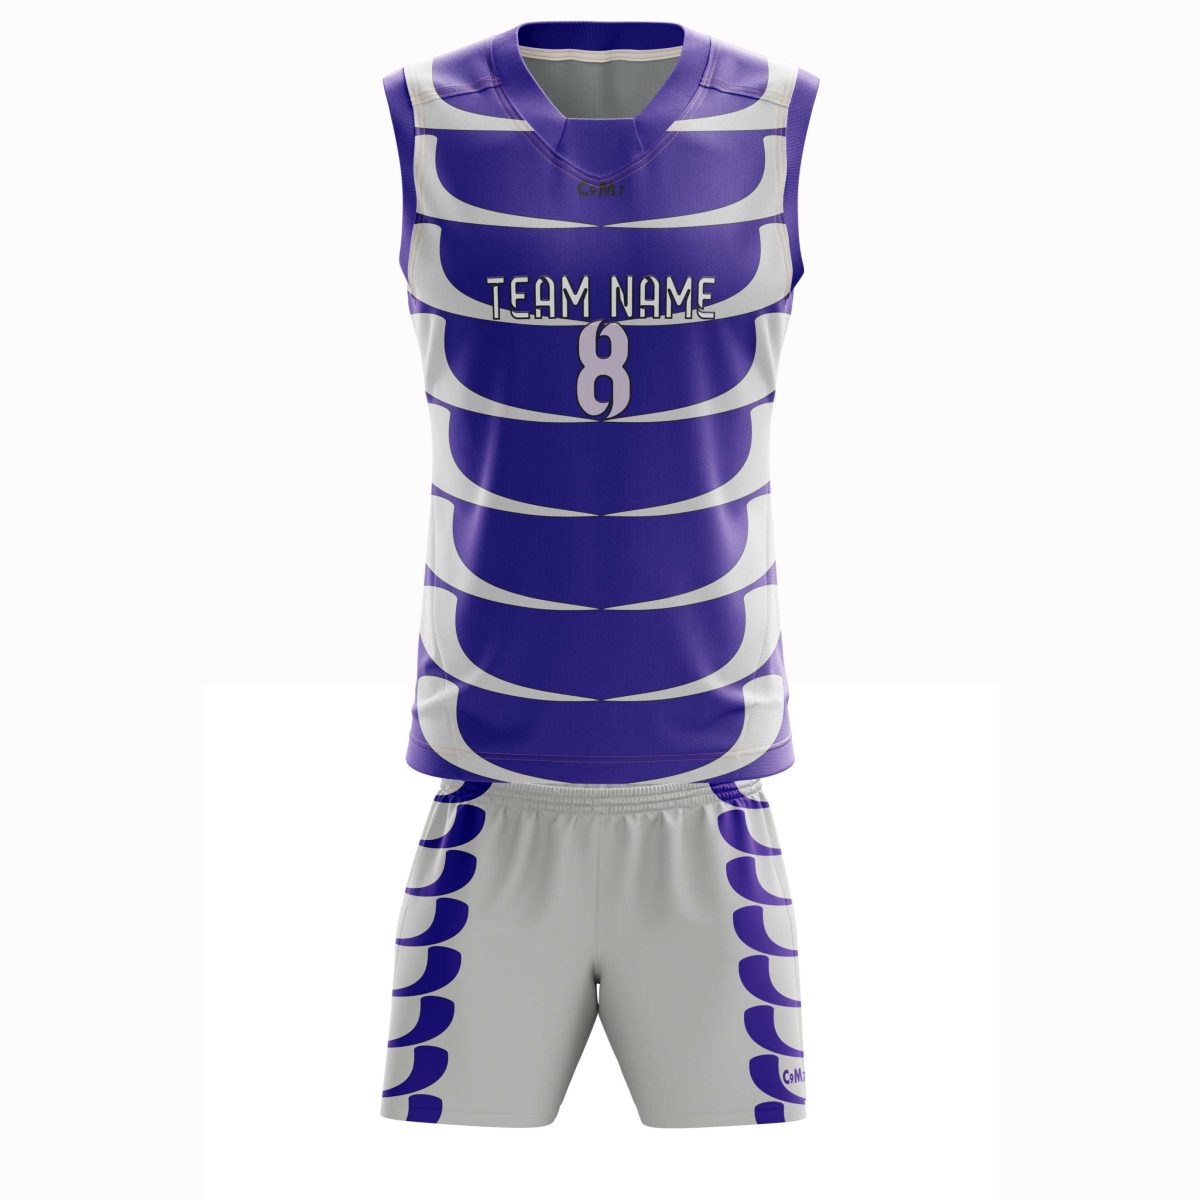 Touch Rugby Kit